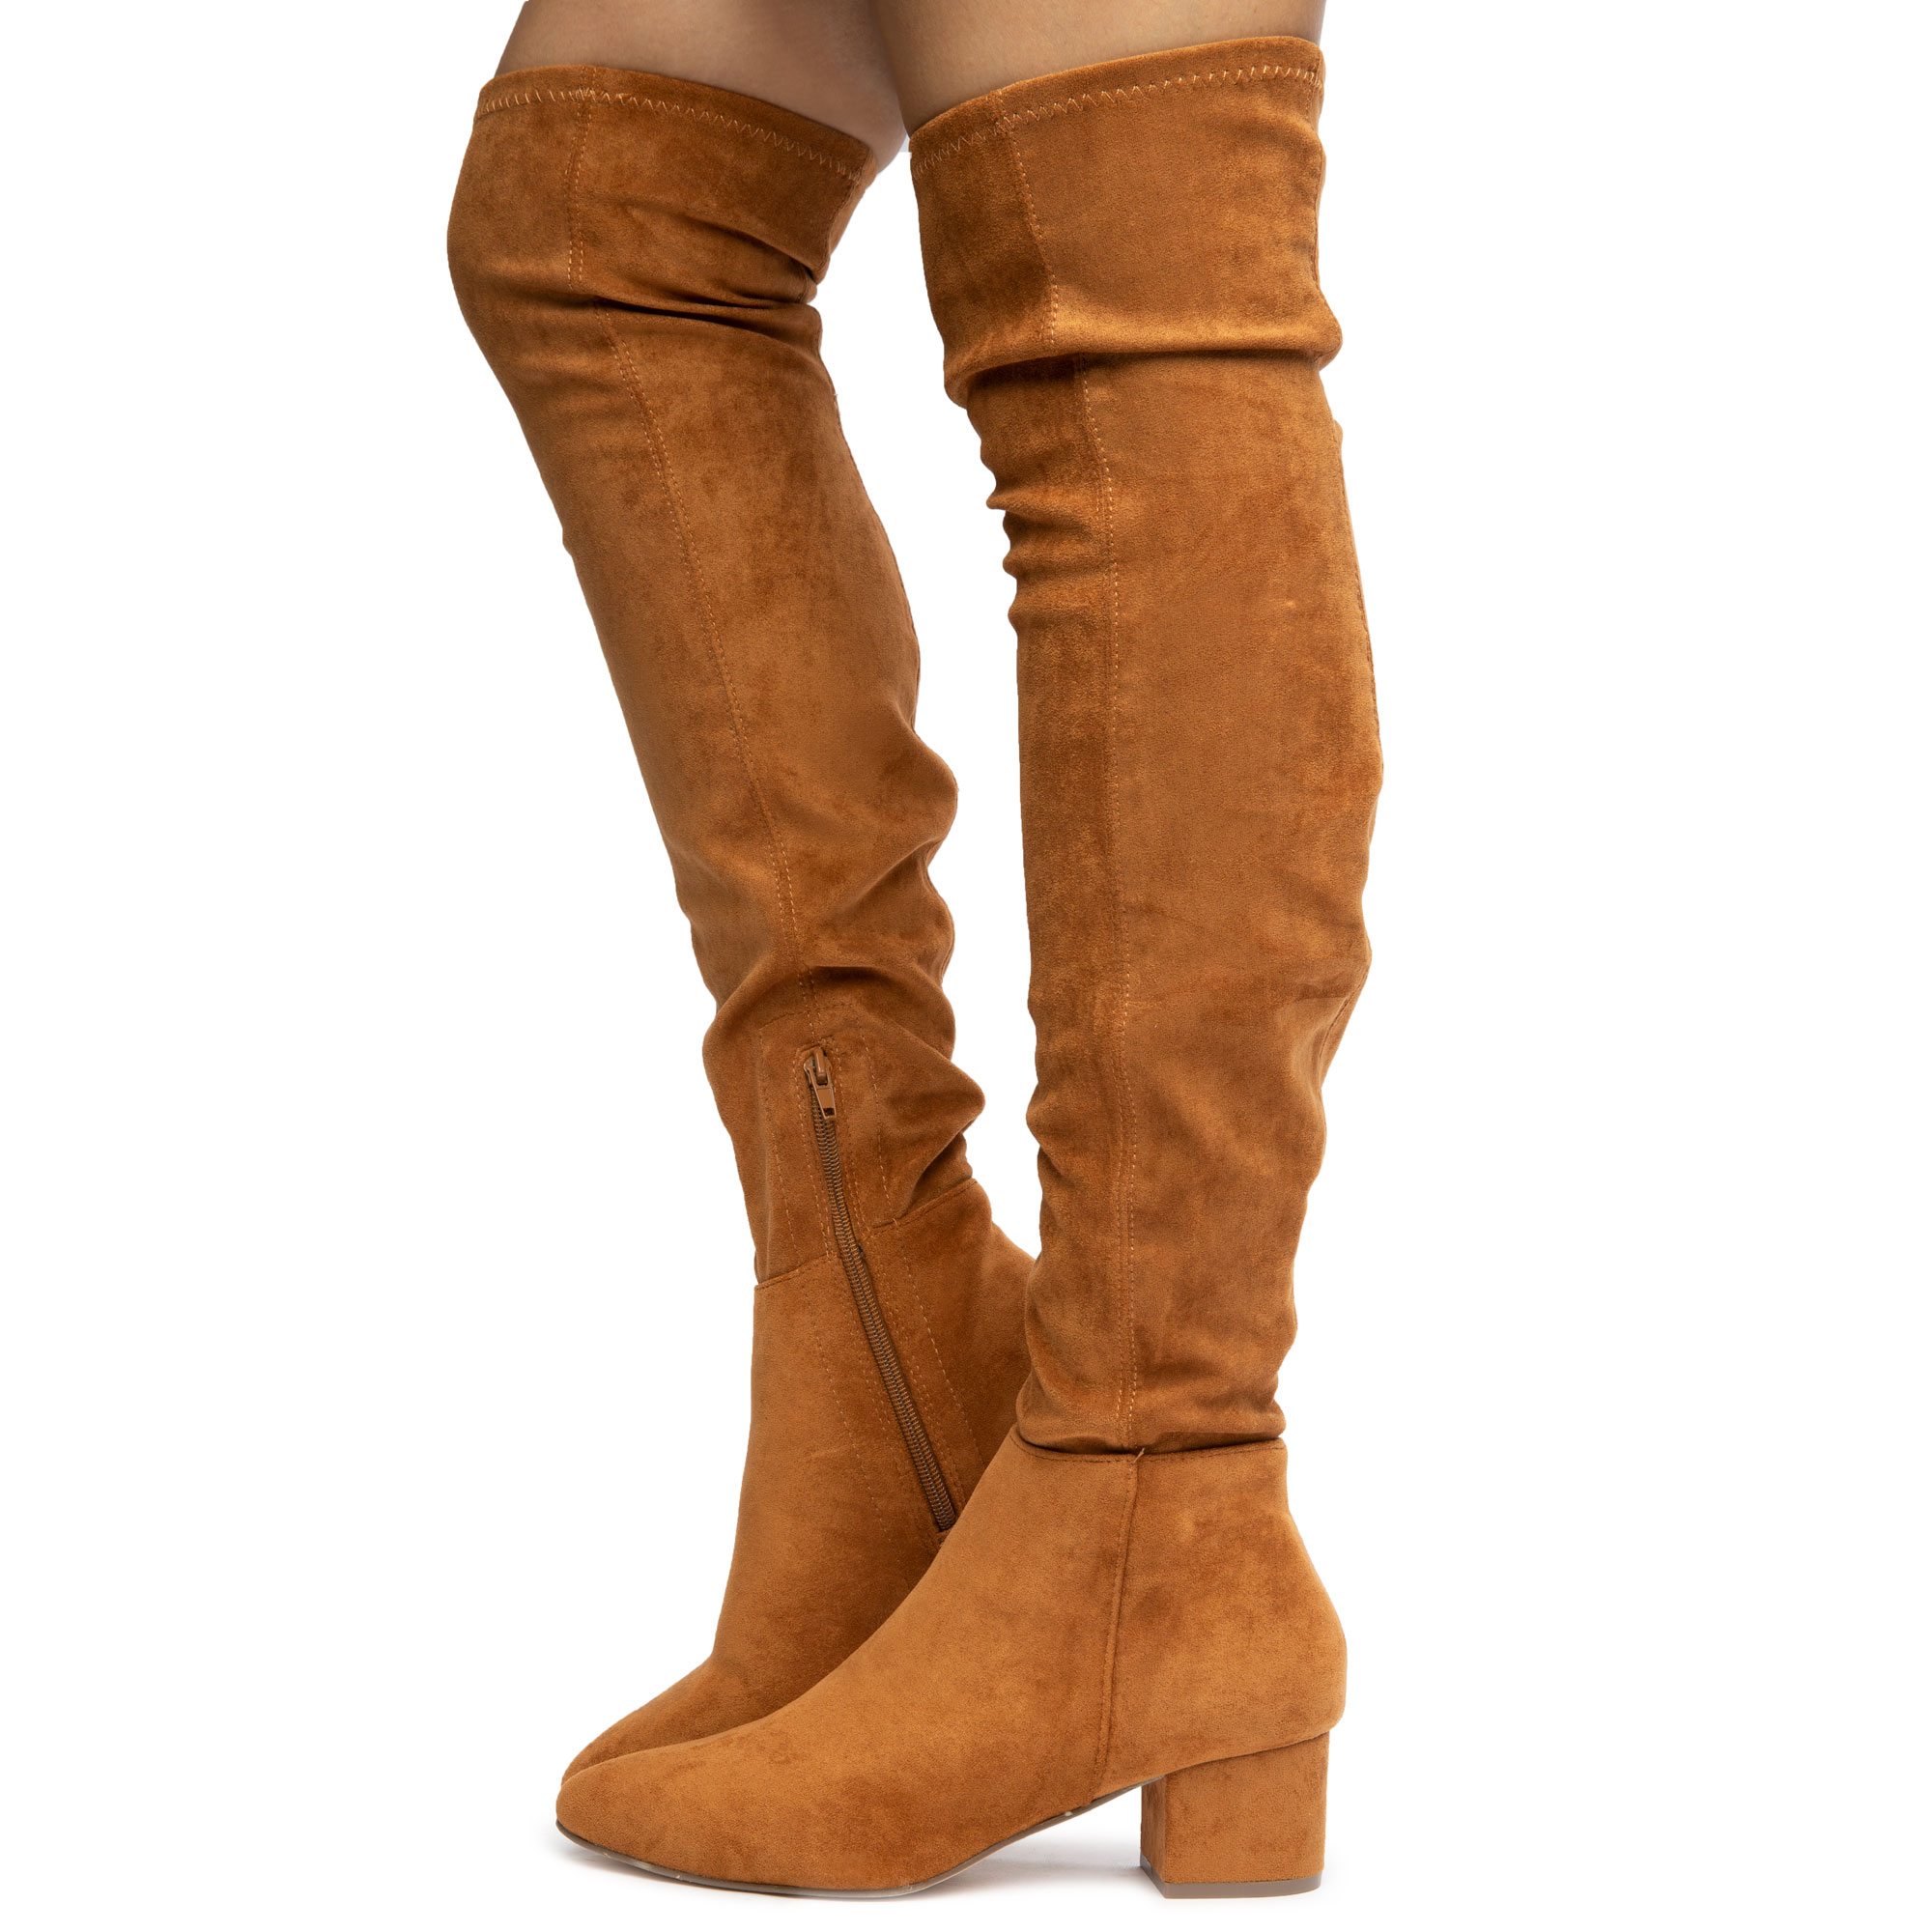 tan over the knee boots